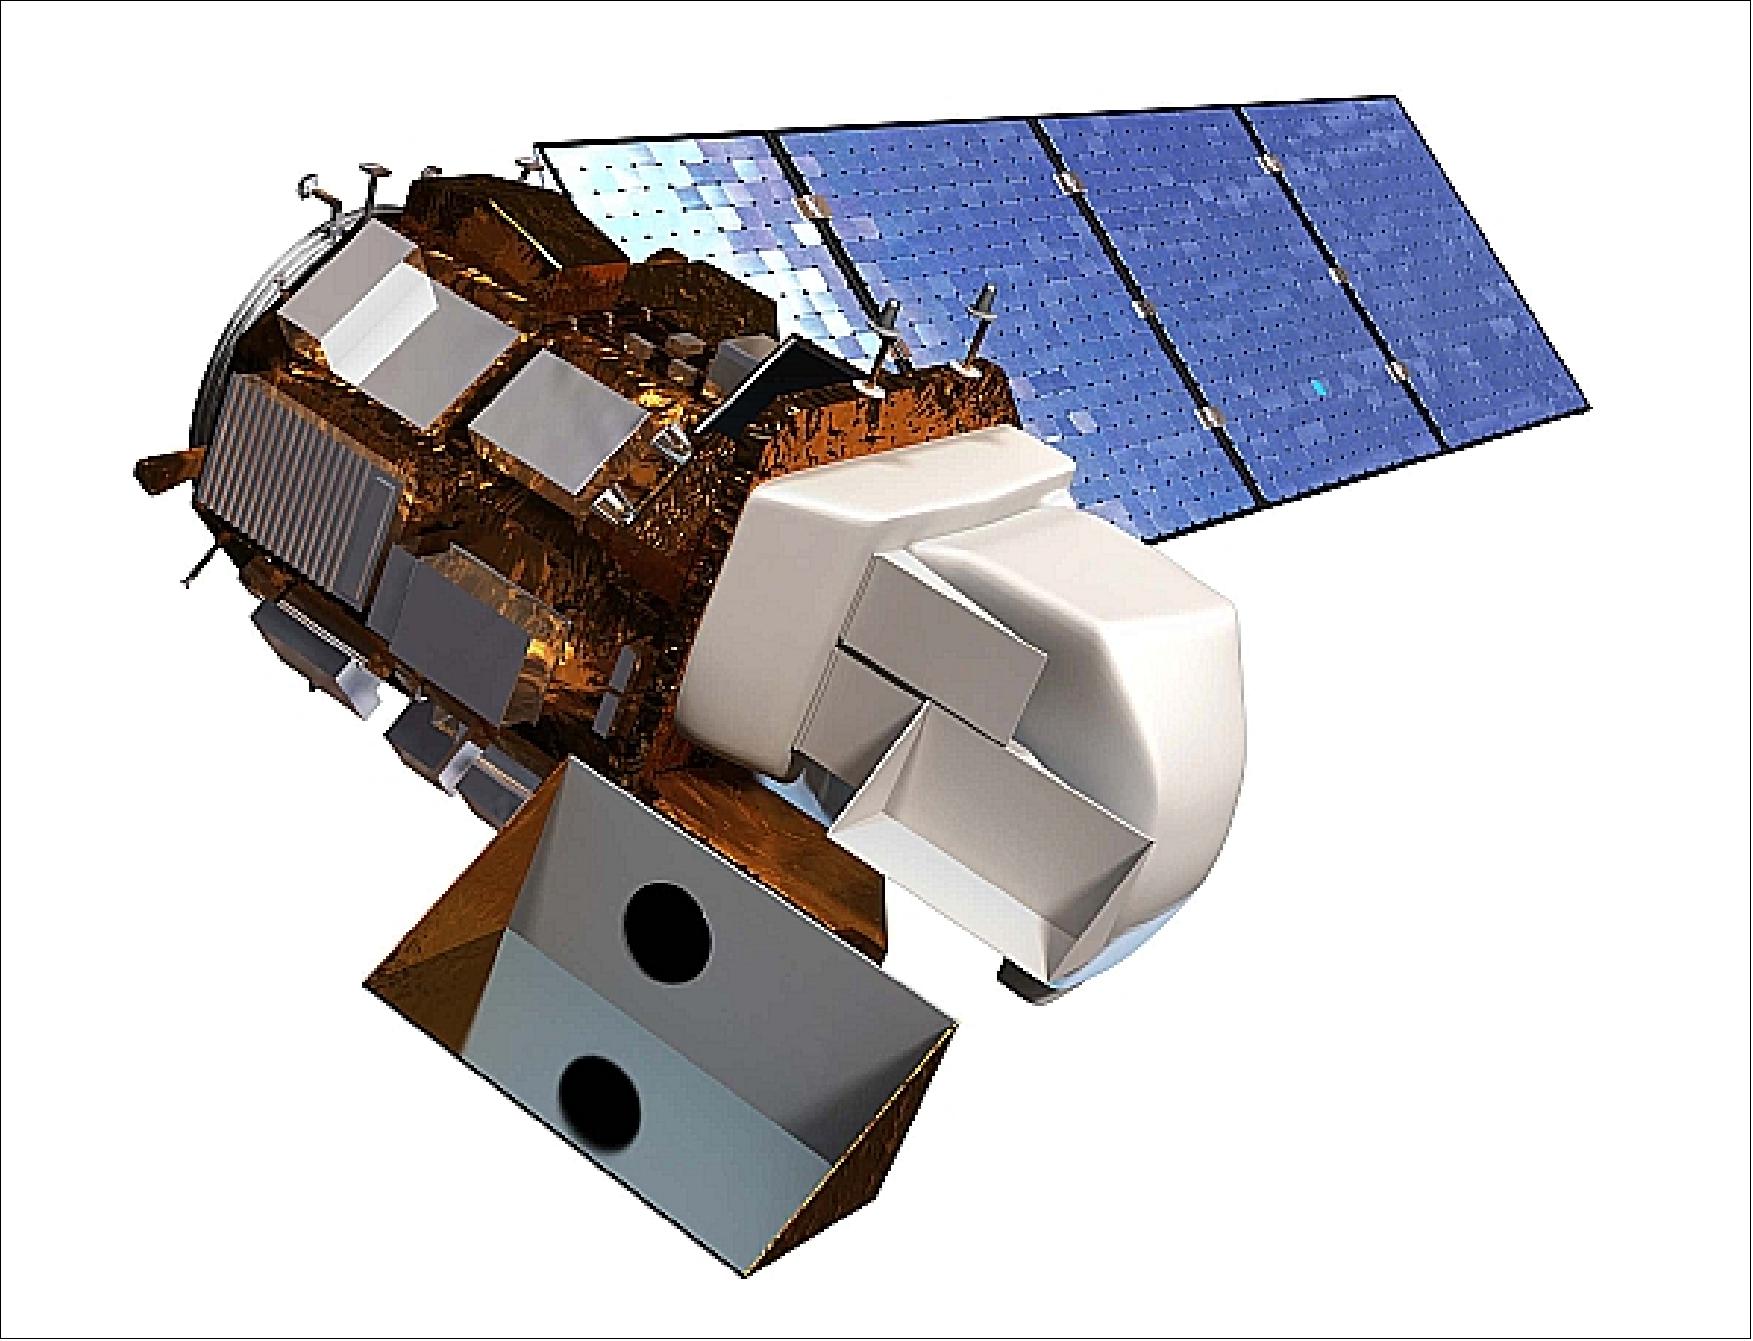 Figure 9: Alternate view of the deployed LDCM spacecraft showing the calibration ports of the instruments TIRS and OLI (image credit: NASA/GSFC)